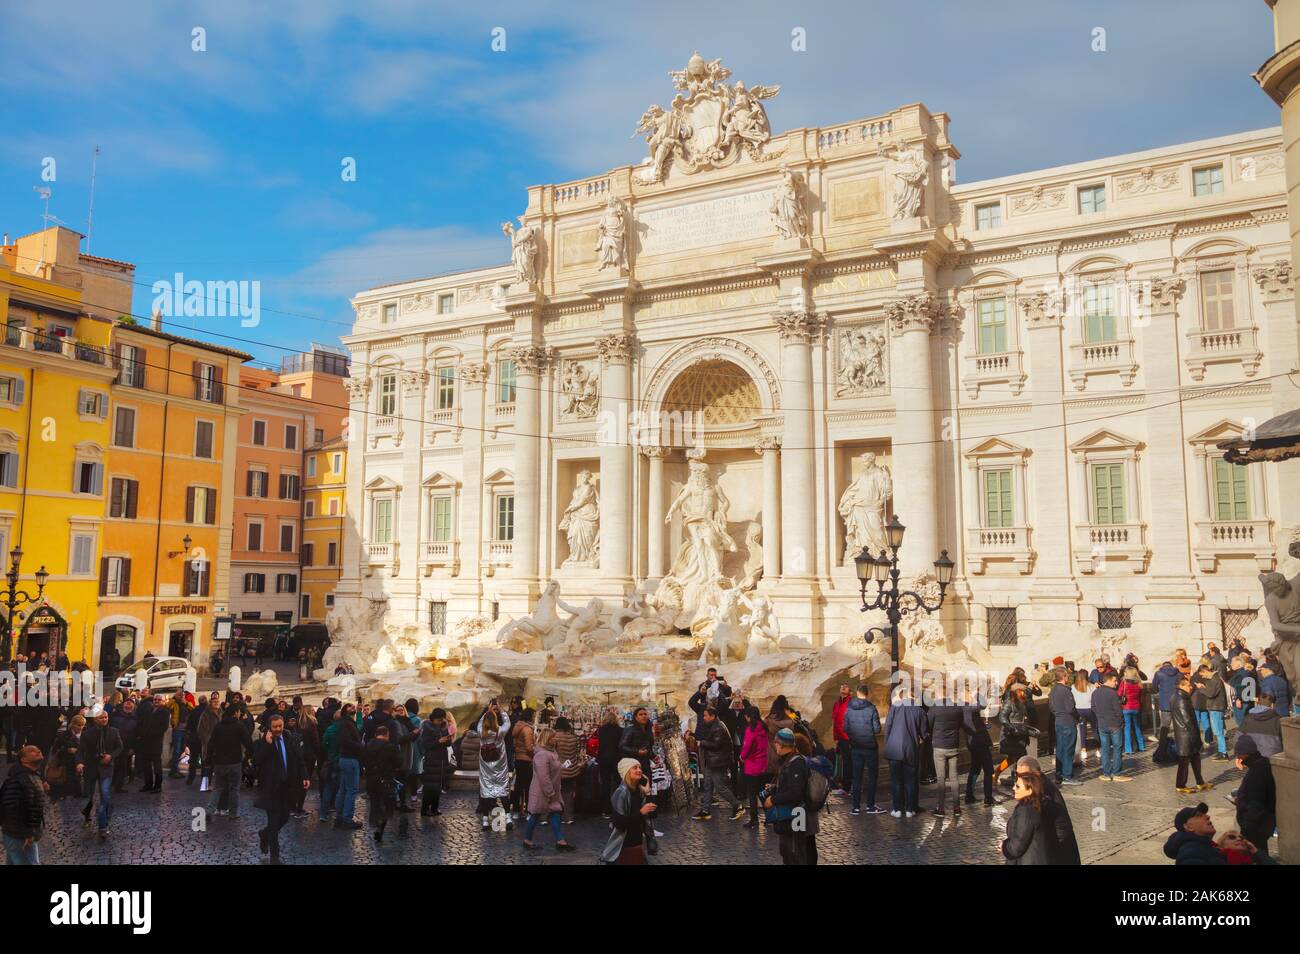 ROME - DECEMBER 12: The world famous Trevi Fountain crowded with tourists on December 12, 2019 in Rome, Italy. Stock Photo